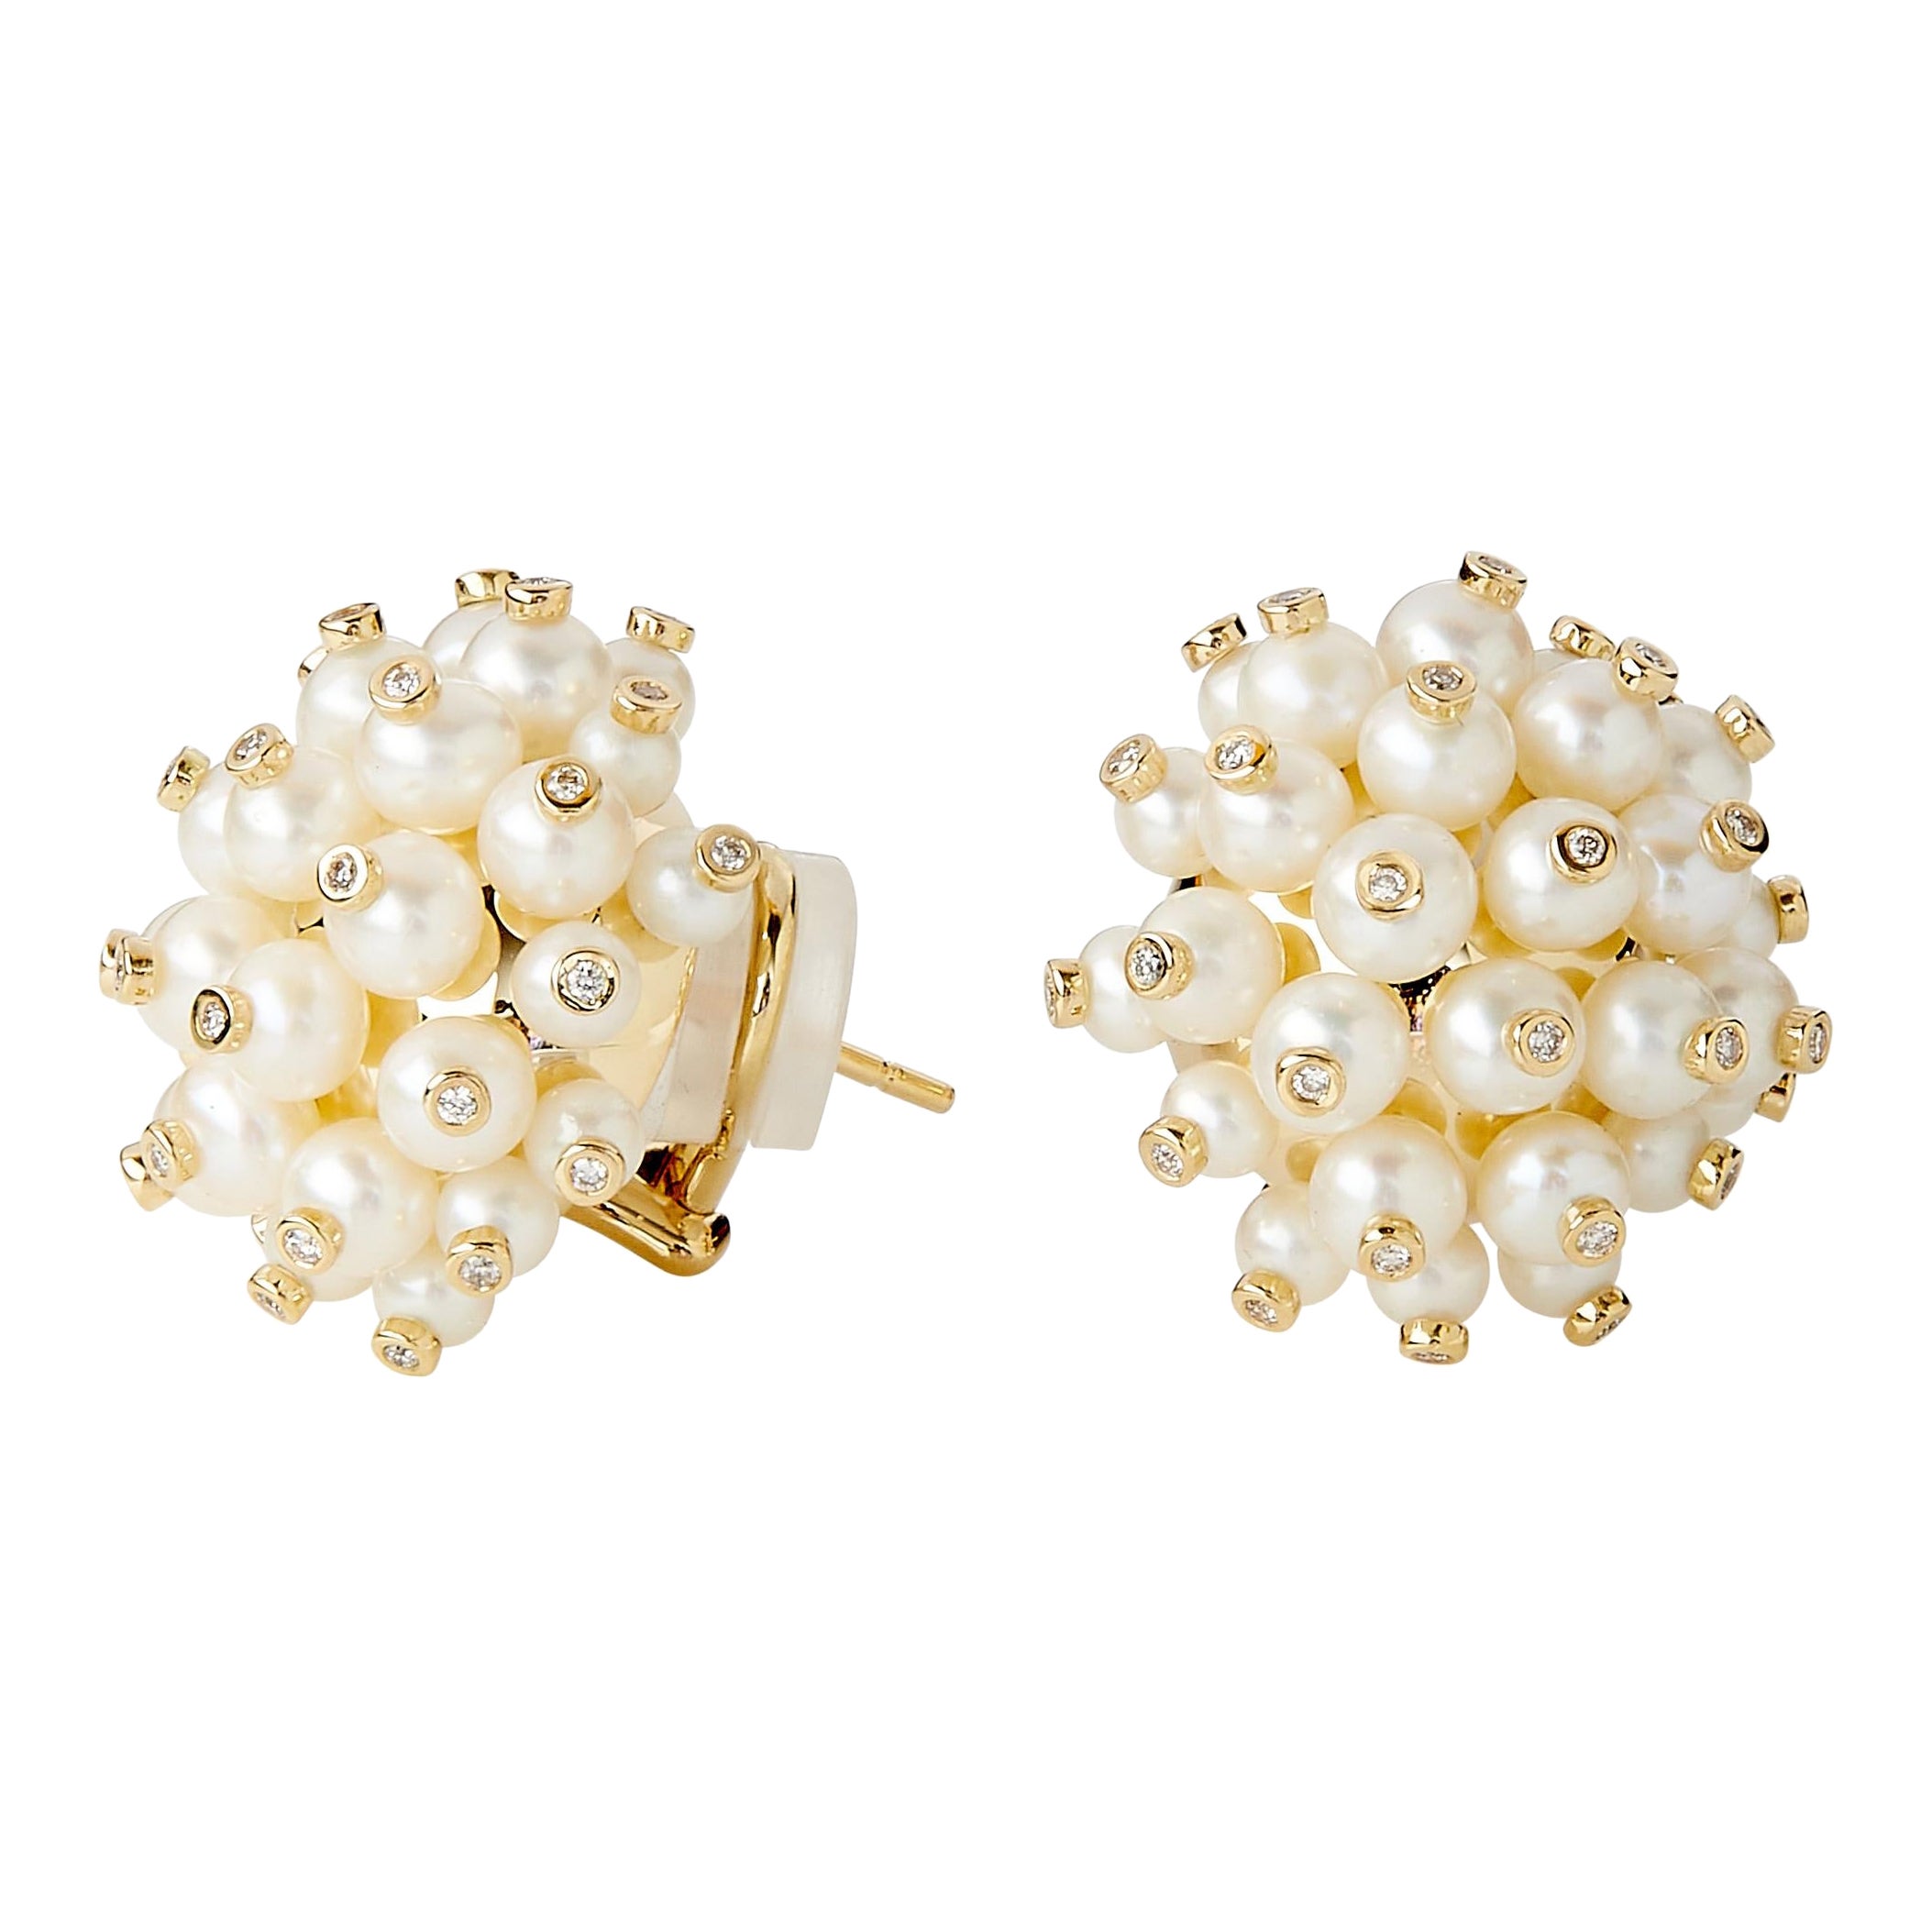 Syna Yellow Gold Cluster Earrings with Pearls and Diamonds